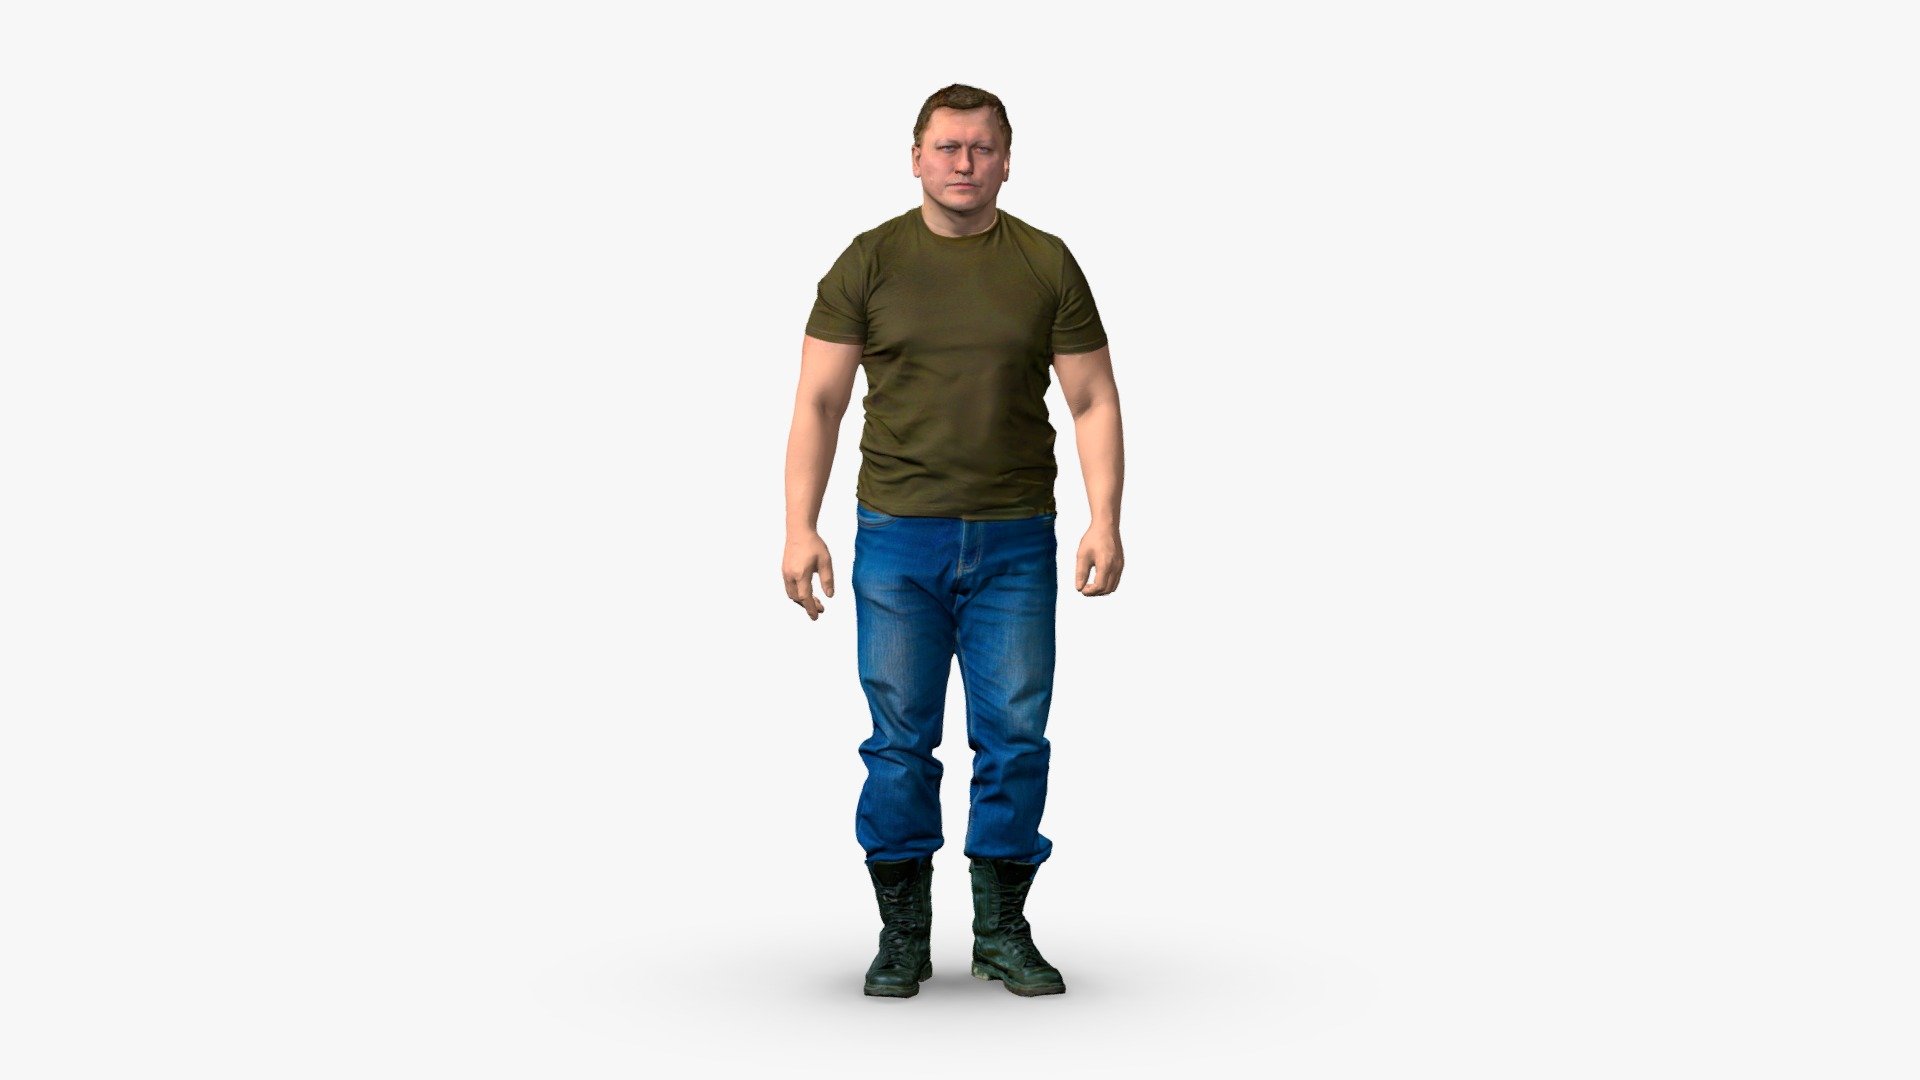 The 3D model depicts a middle-aged man with a sturdy build, who is in a relaxed pose. He is wearing a pair of blue jeans and a dark green T-shirt that fits comfortably on his body. The man's face has a neutral expression, with eyes that are looking straight ahead.

The 3D model was obtained by scanning 3d model